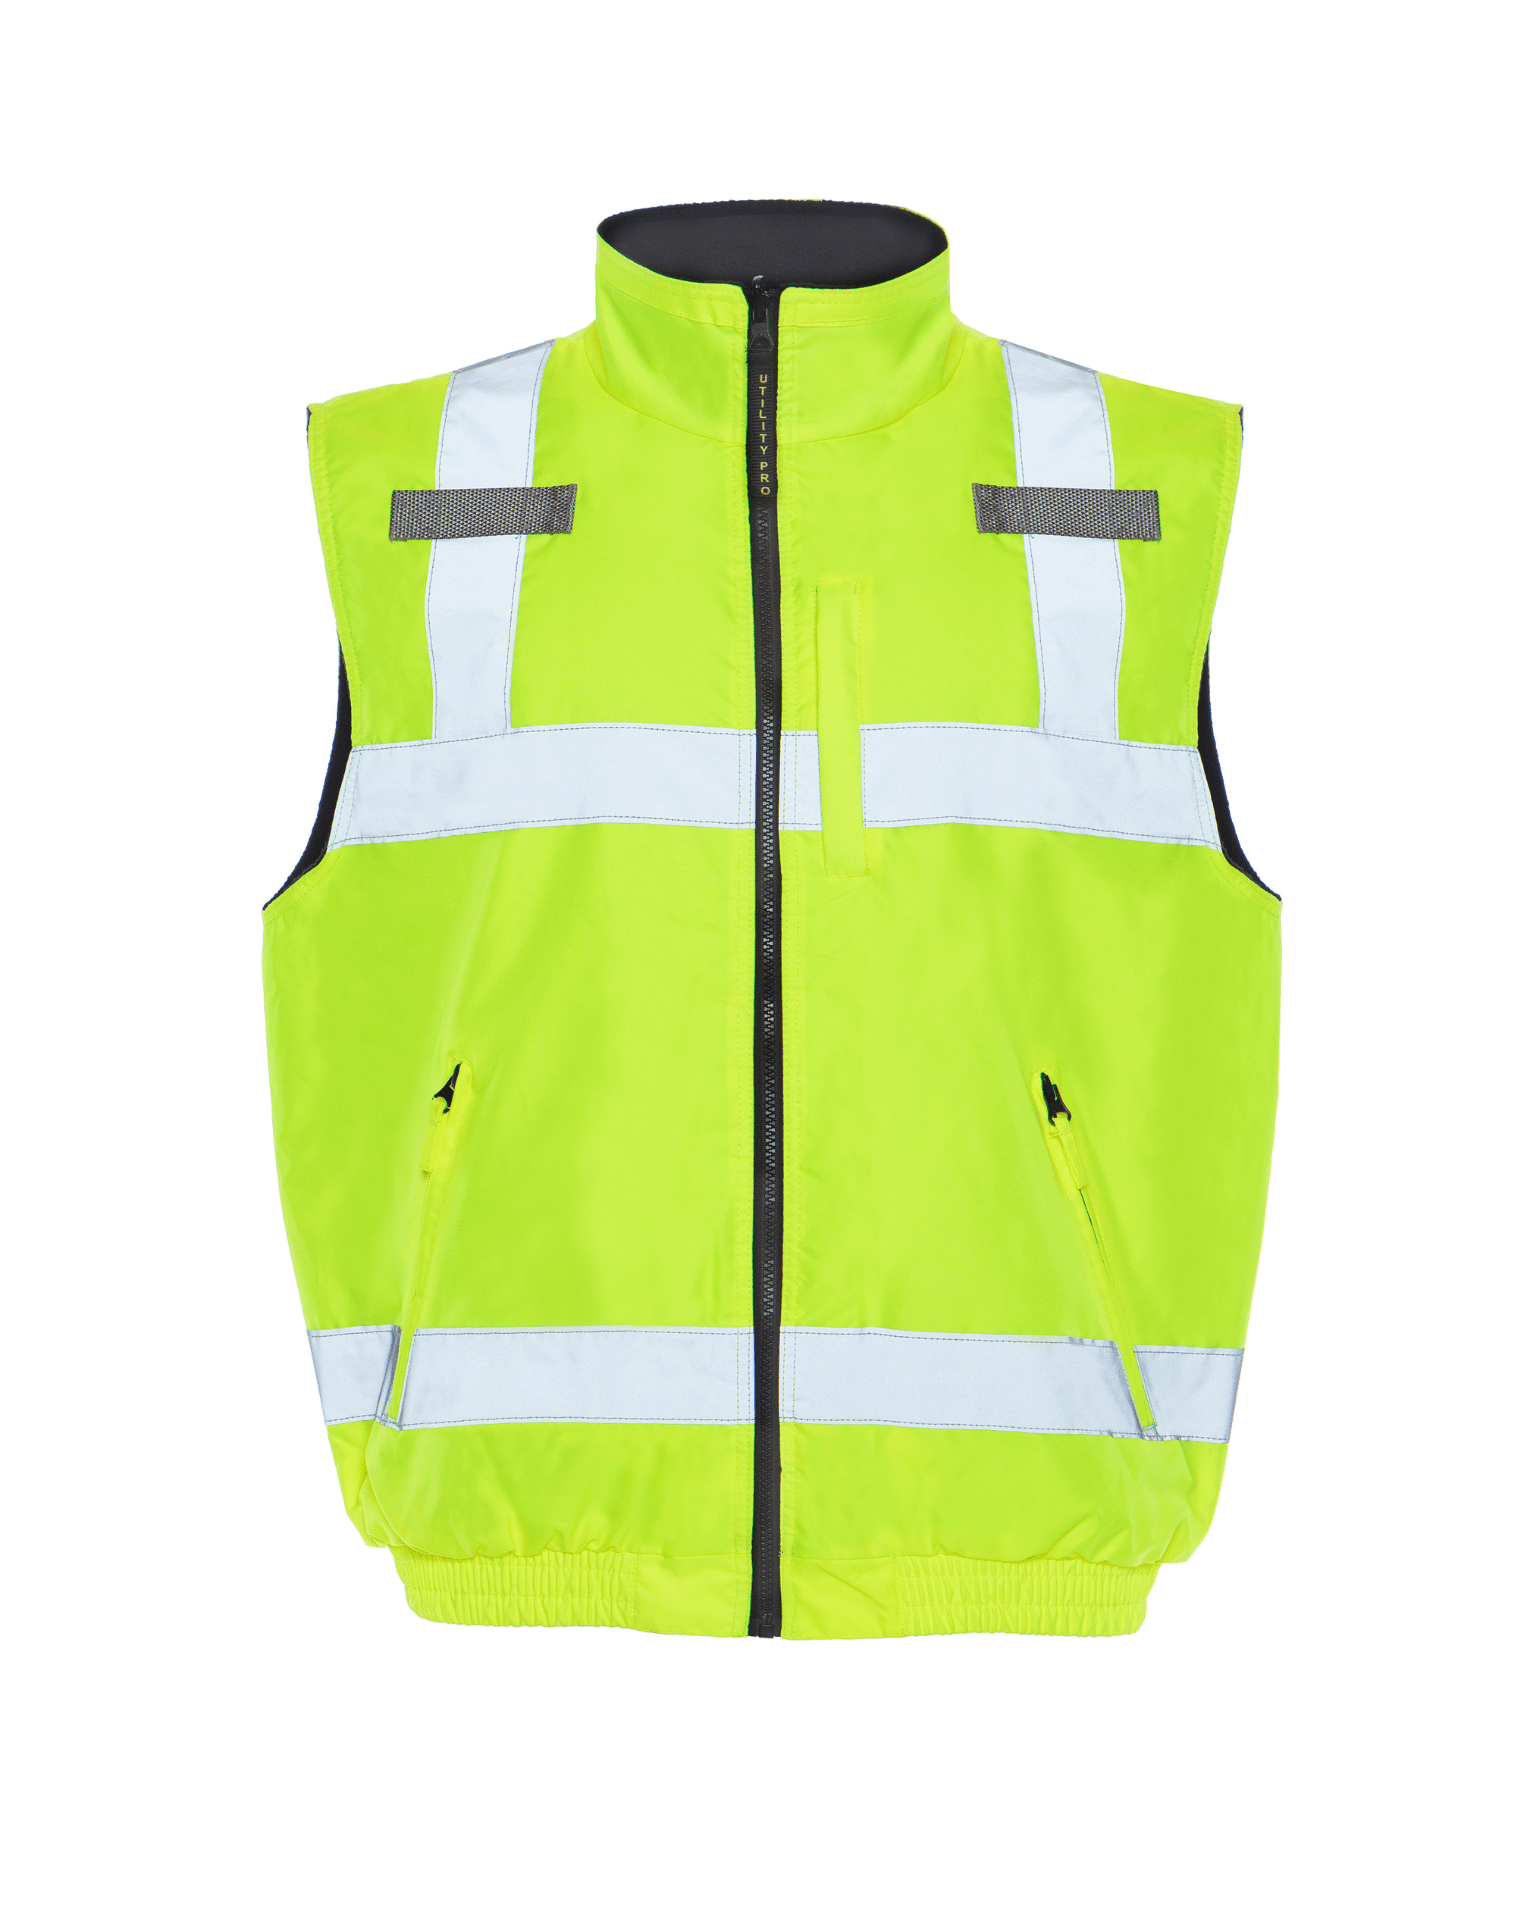 UHV1004 Hi Vis Safety Contractor Coat - Yellow - Utility Pro